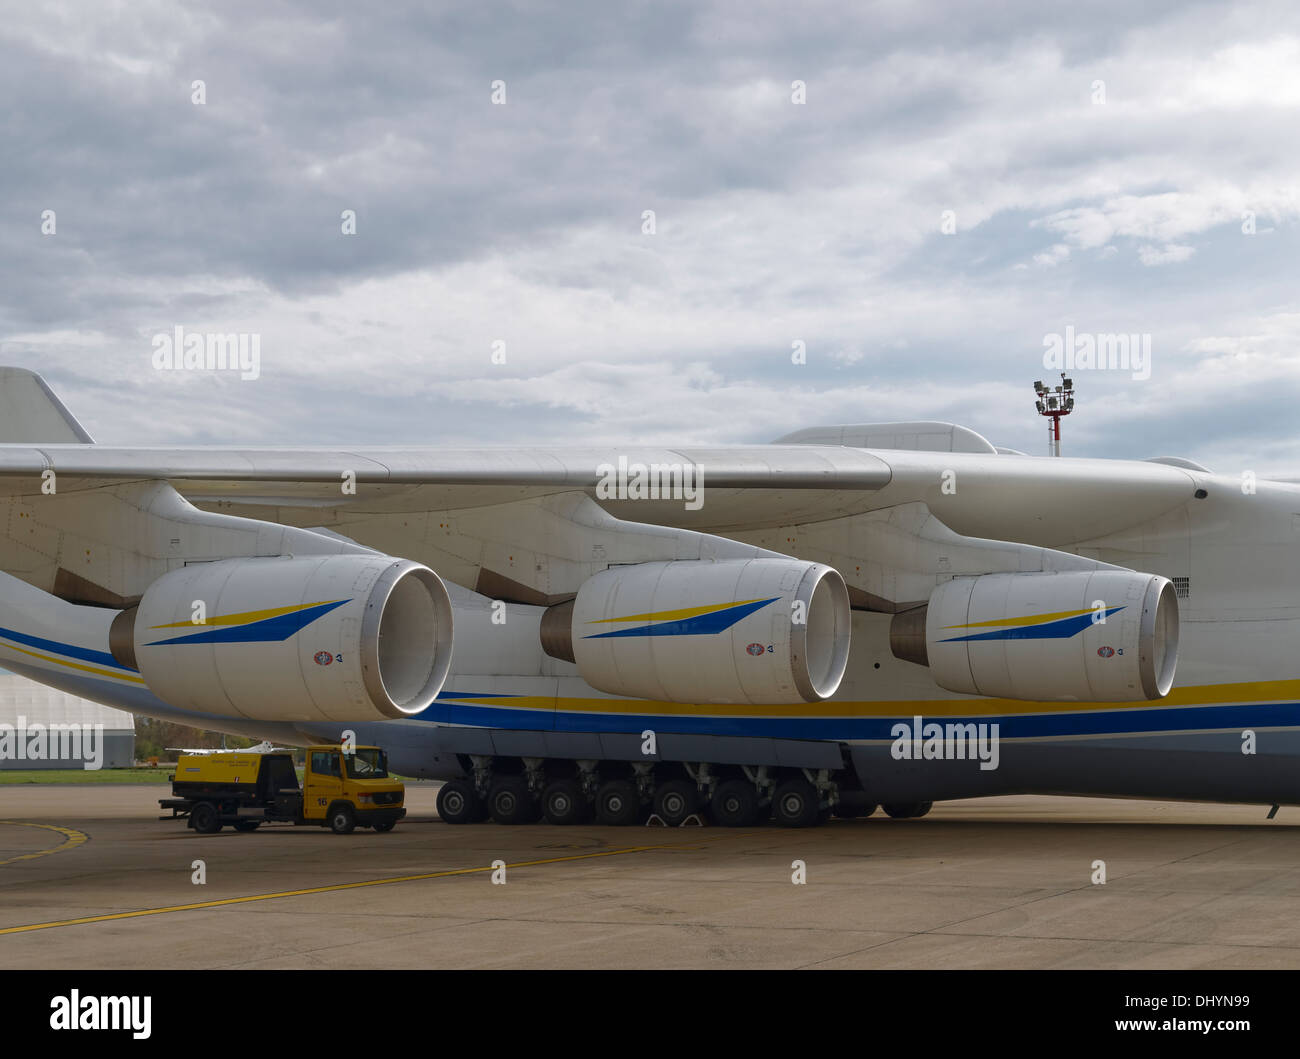 Service truck (power generator) is on the side of the Antonov An-225 airplane with three engines in line for size comparison. Stock Photo